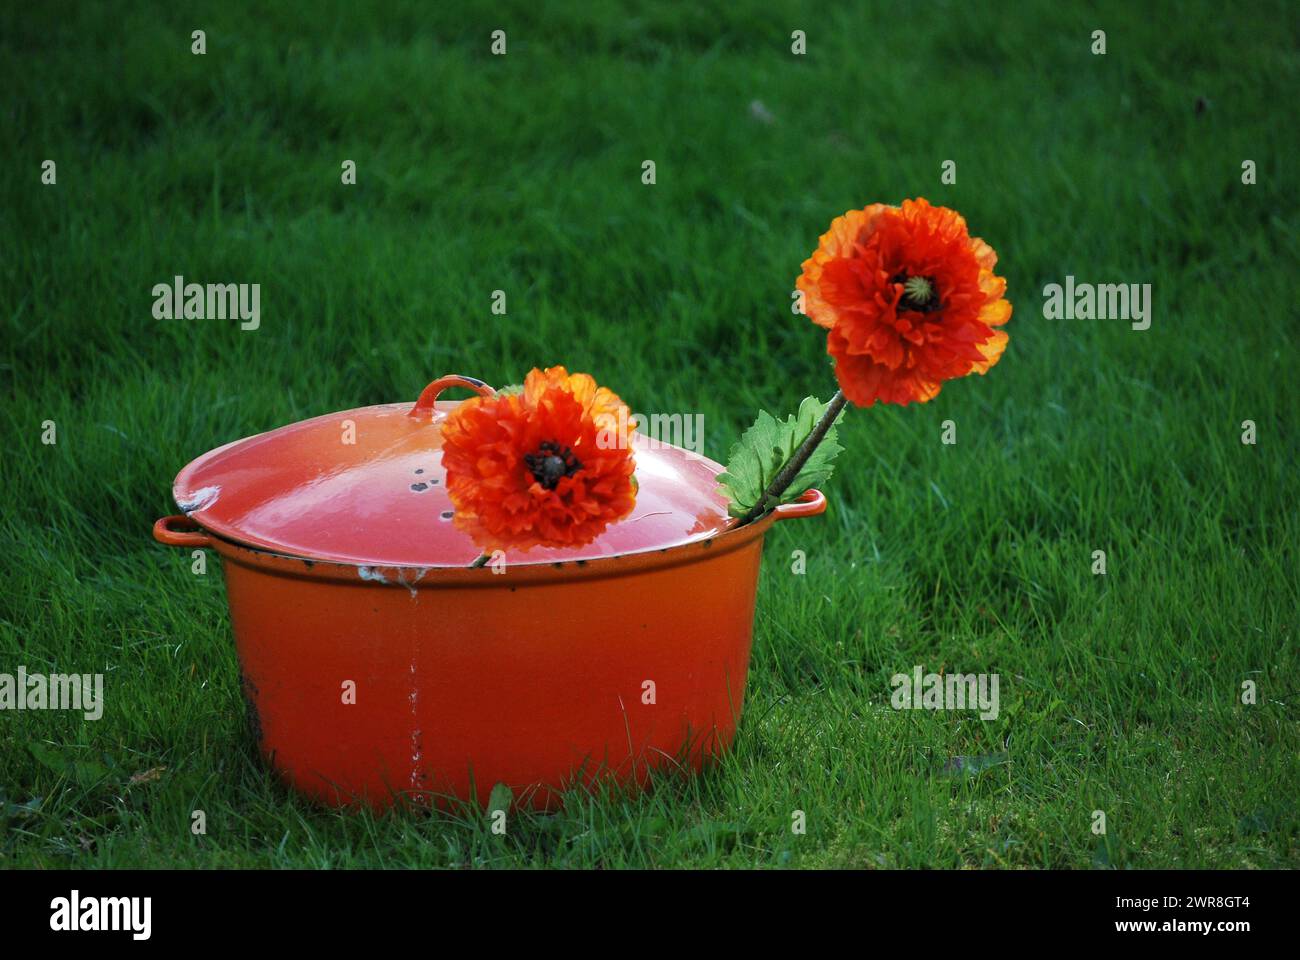 expanse of grass, green lawn with orange pot and an orange flower Stock Photo